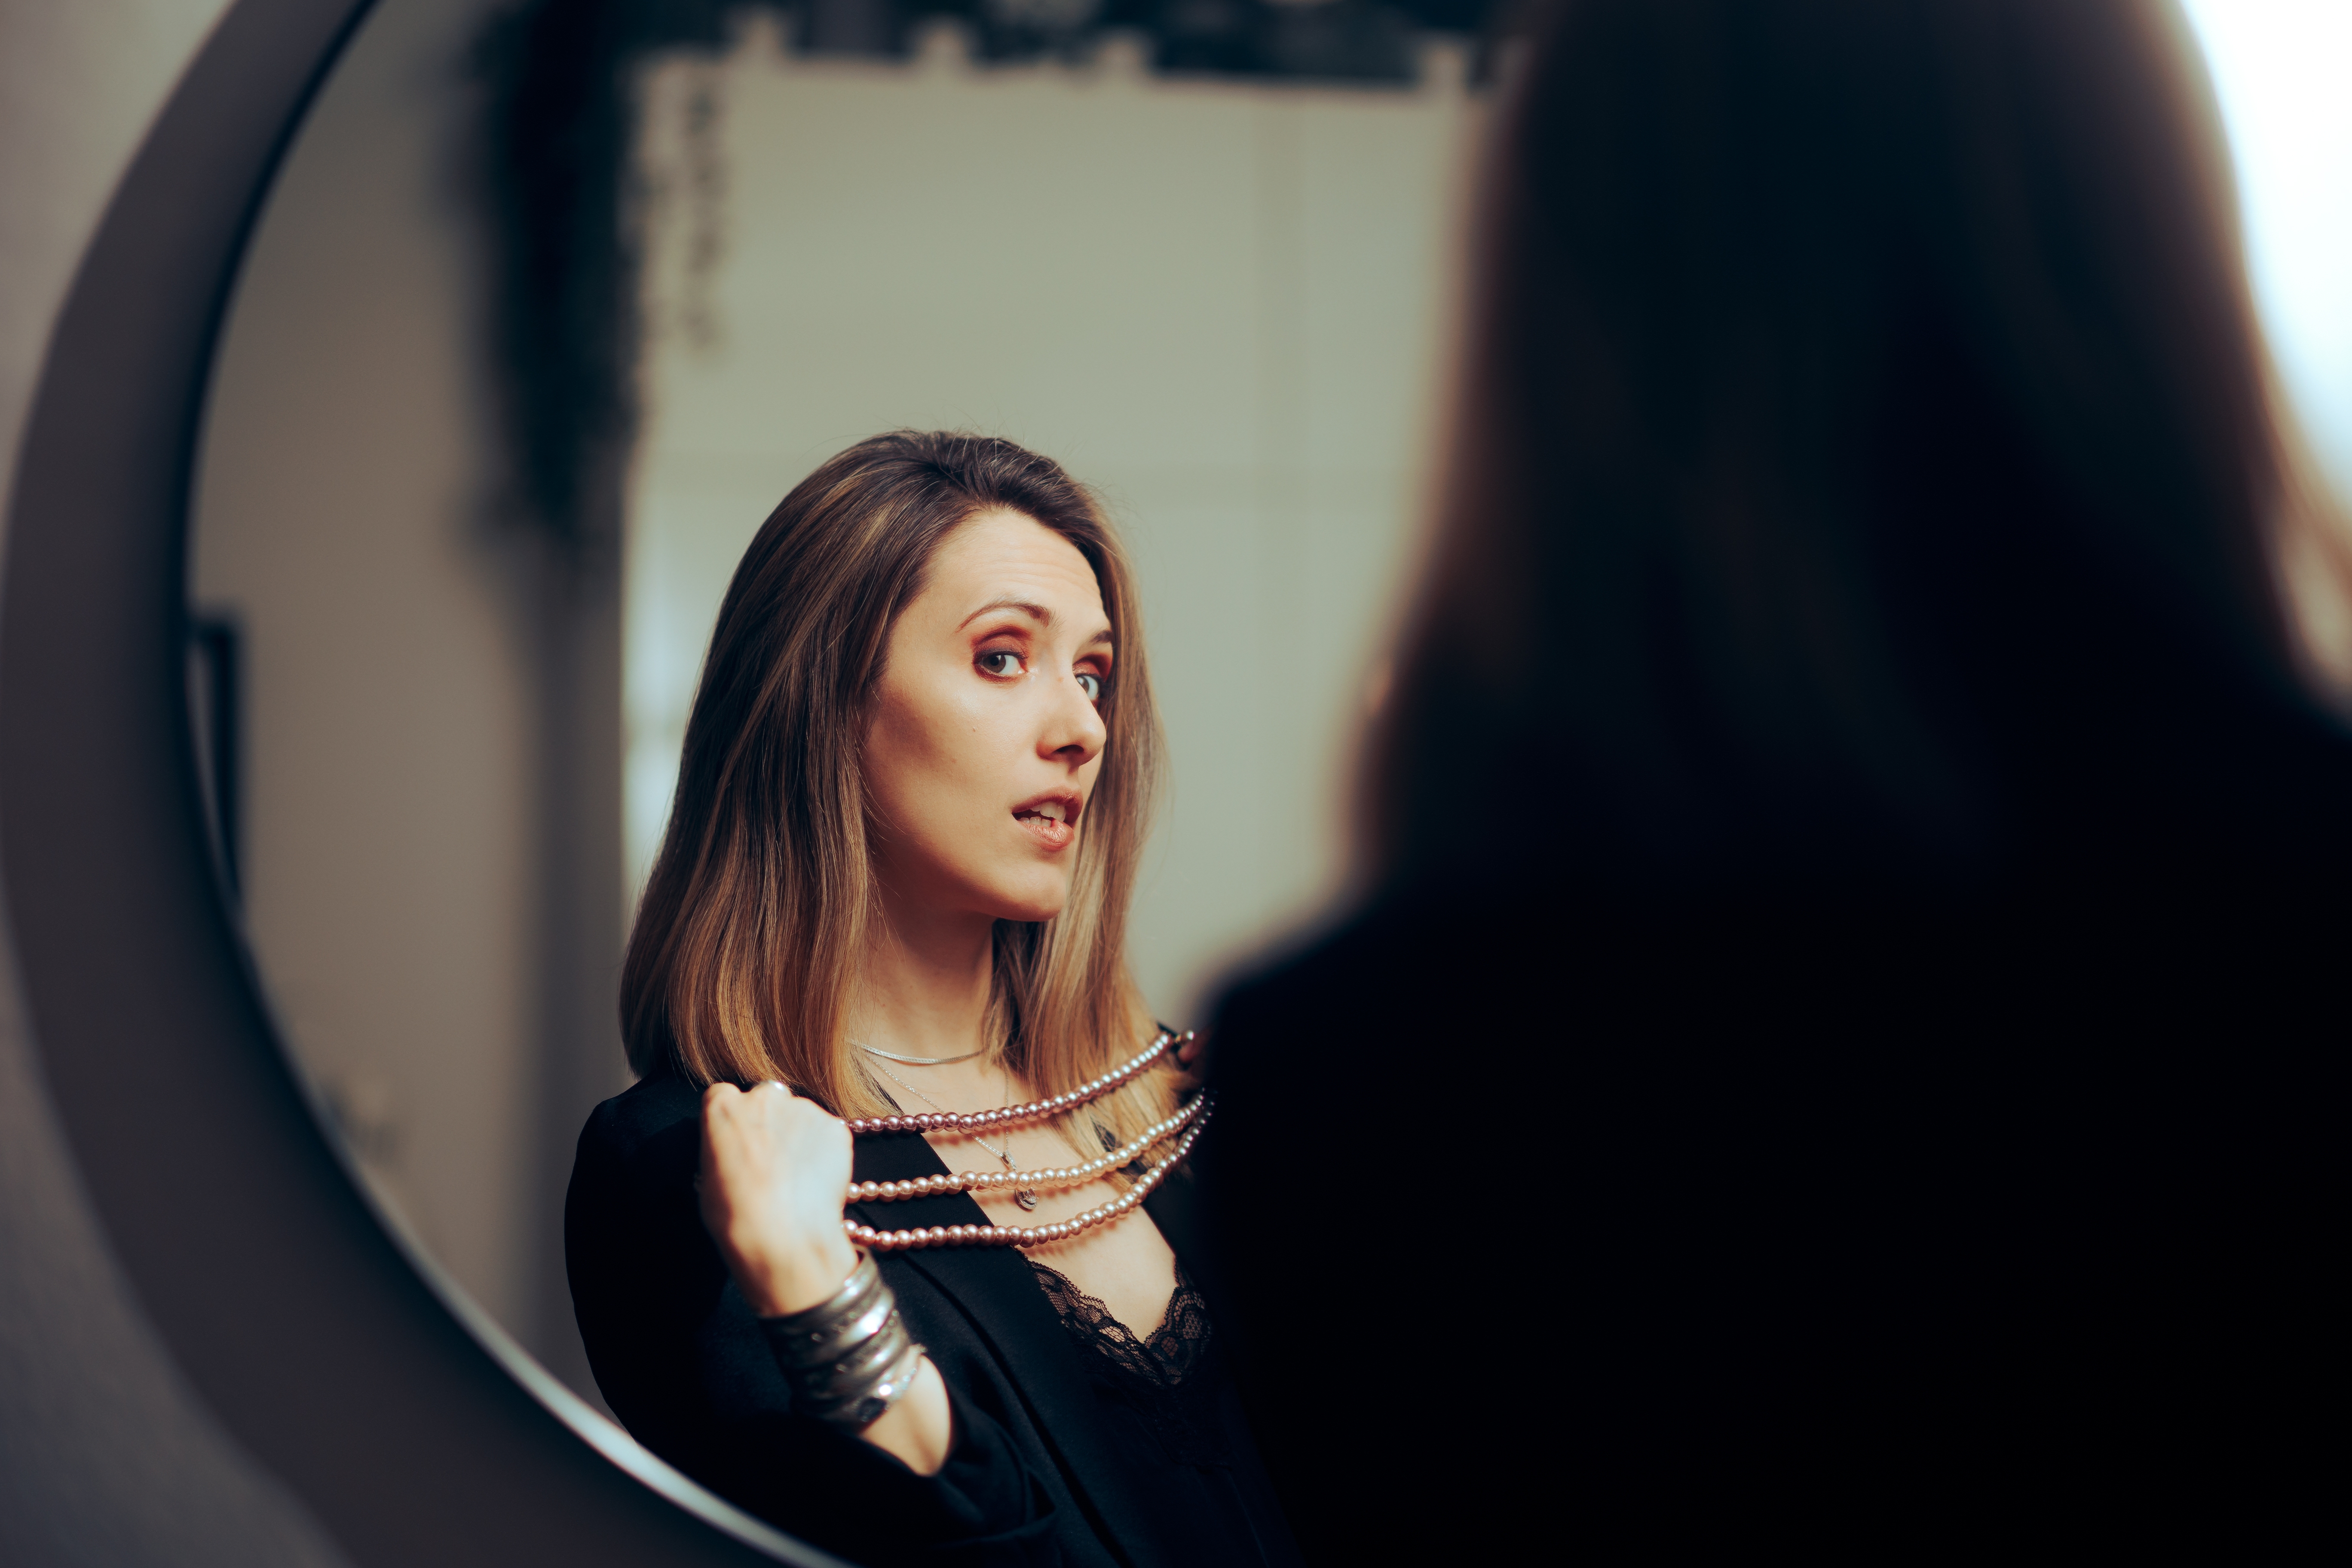 A woman looking at herself in the mirror | Source: Shutterstock